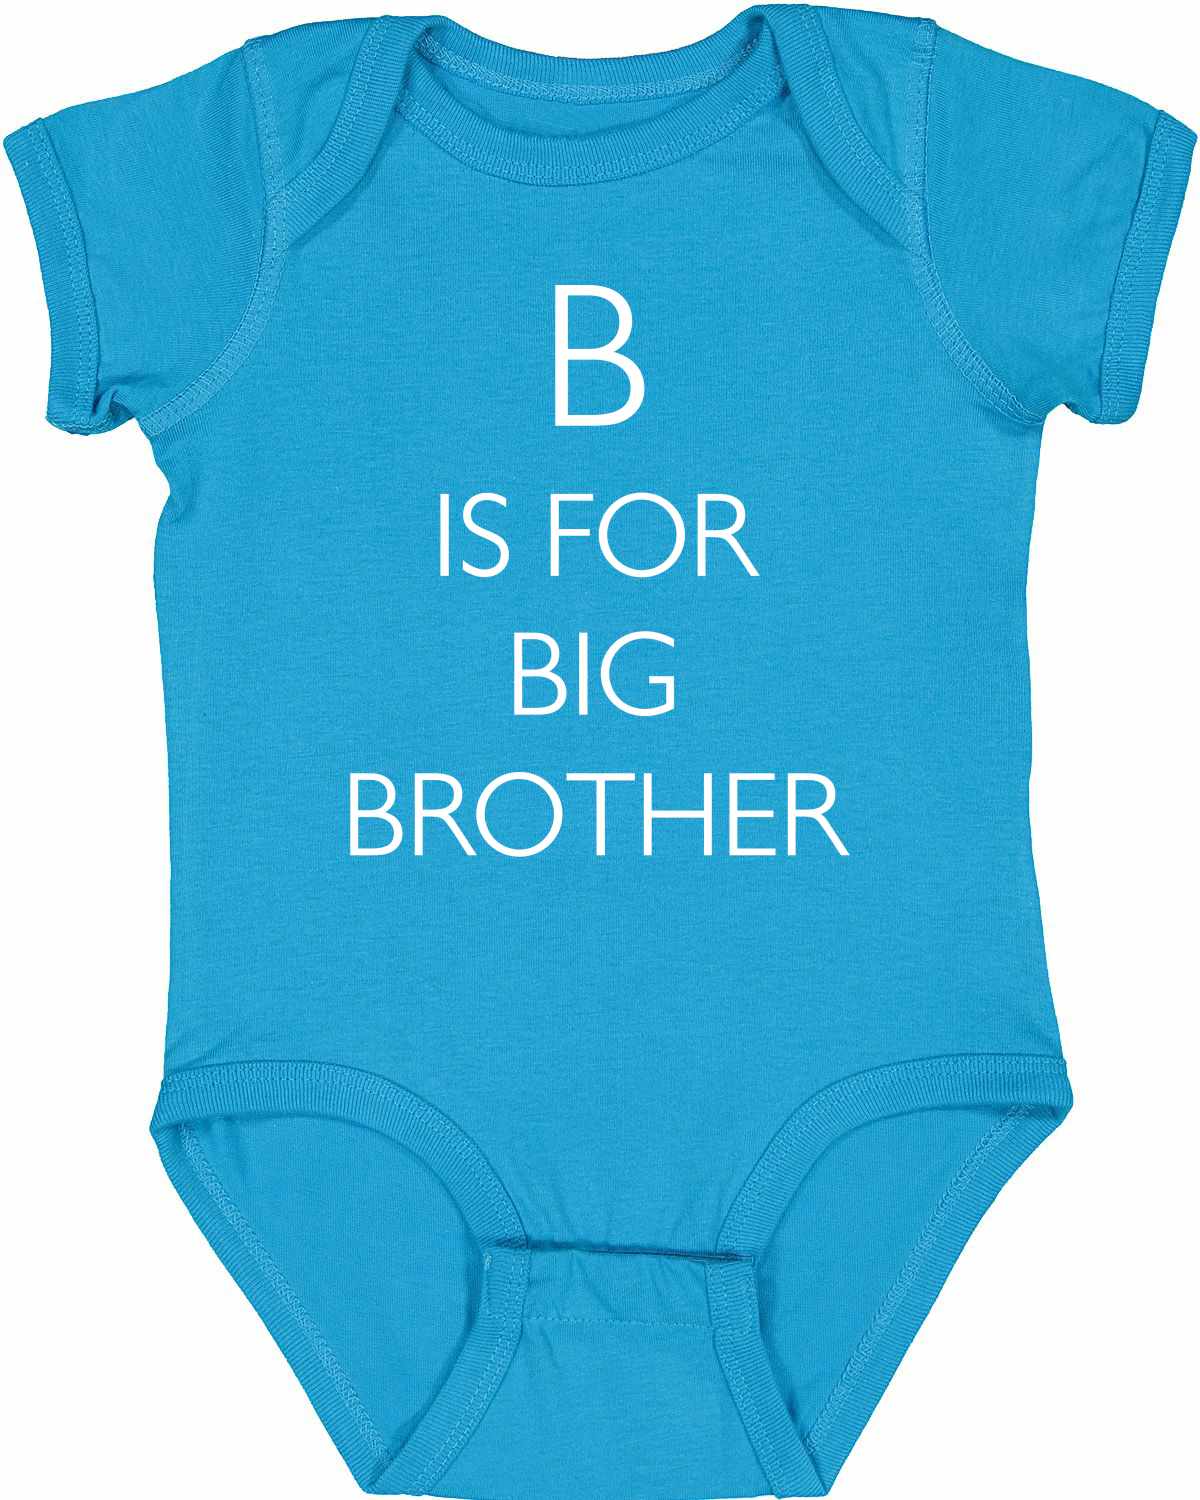 B is for Big Brother Infant BodySuit (#1179-10)